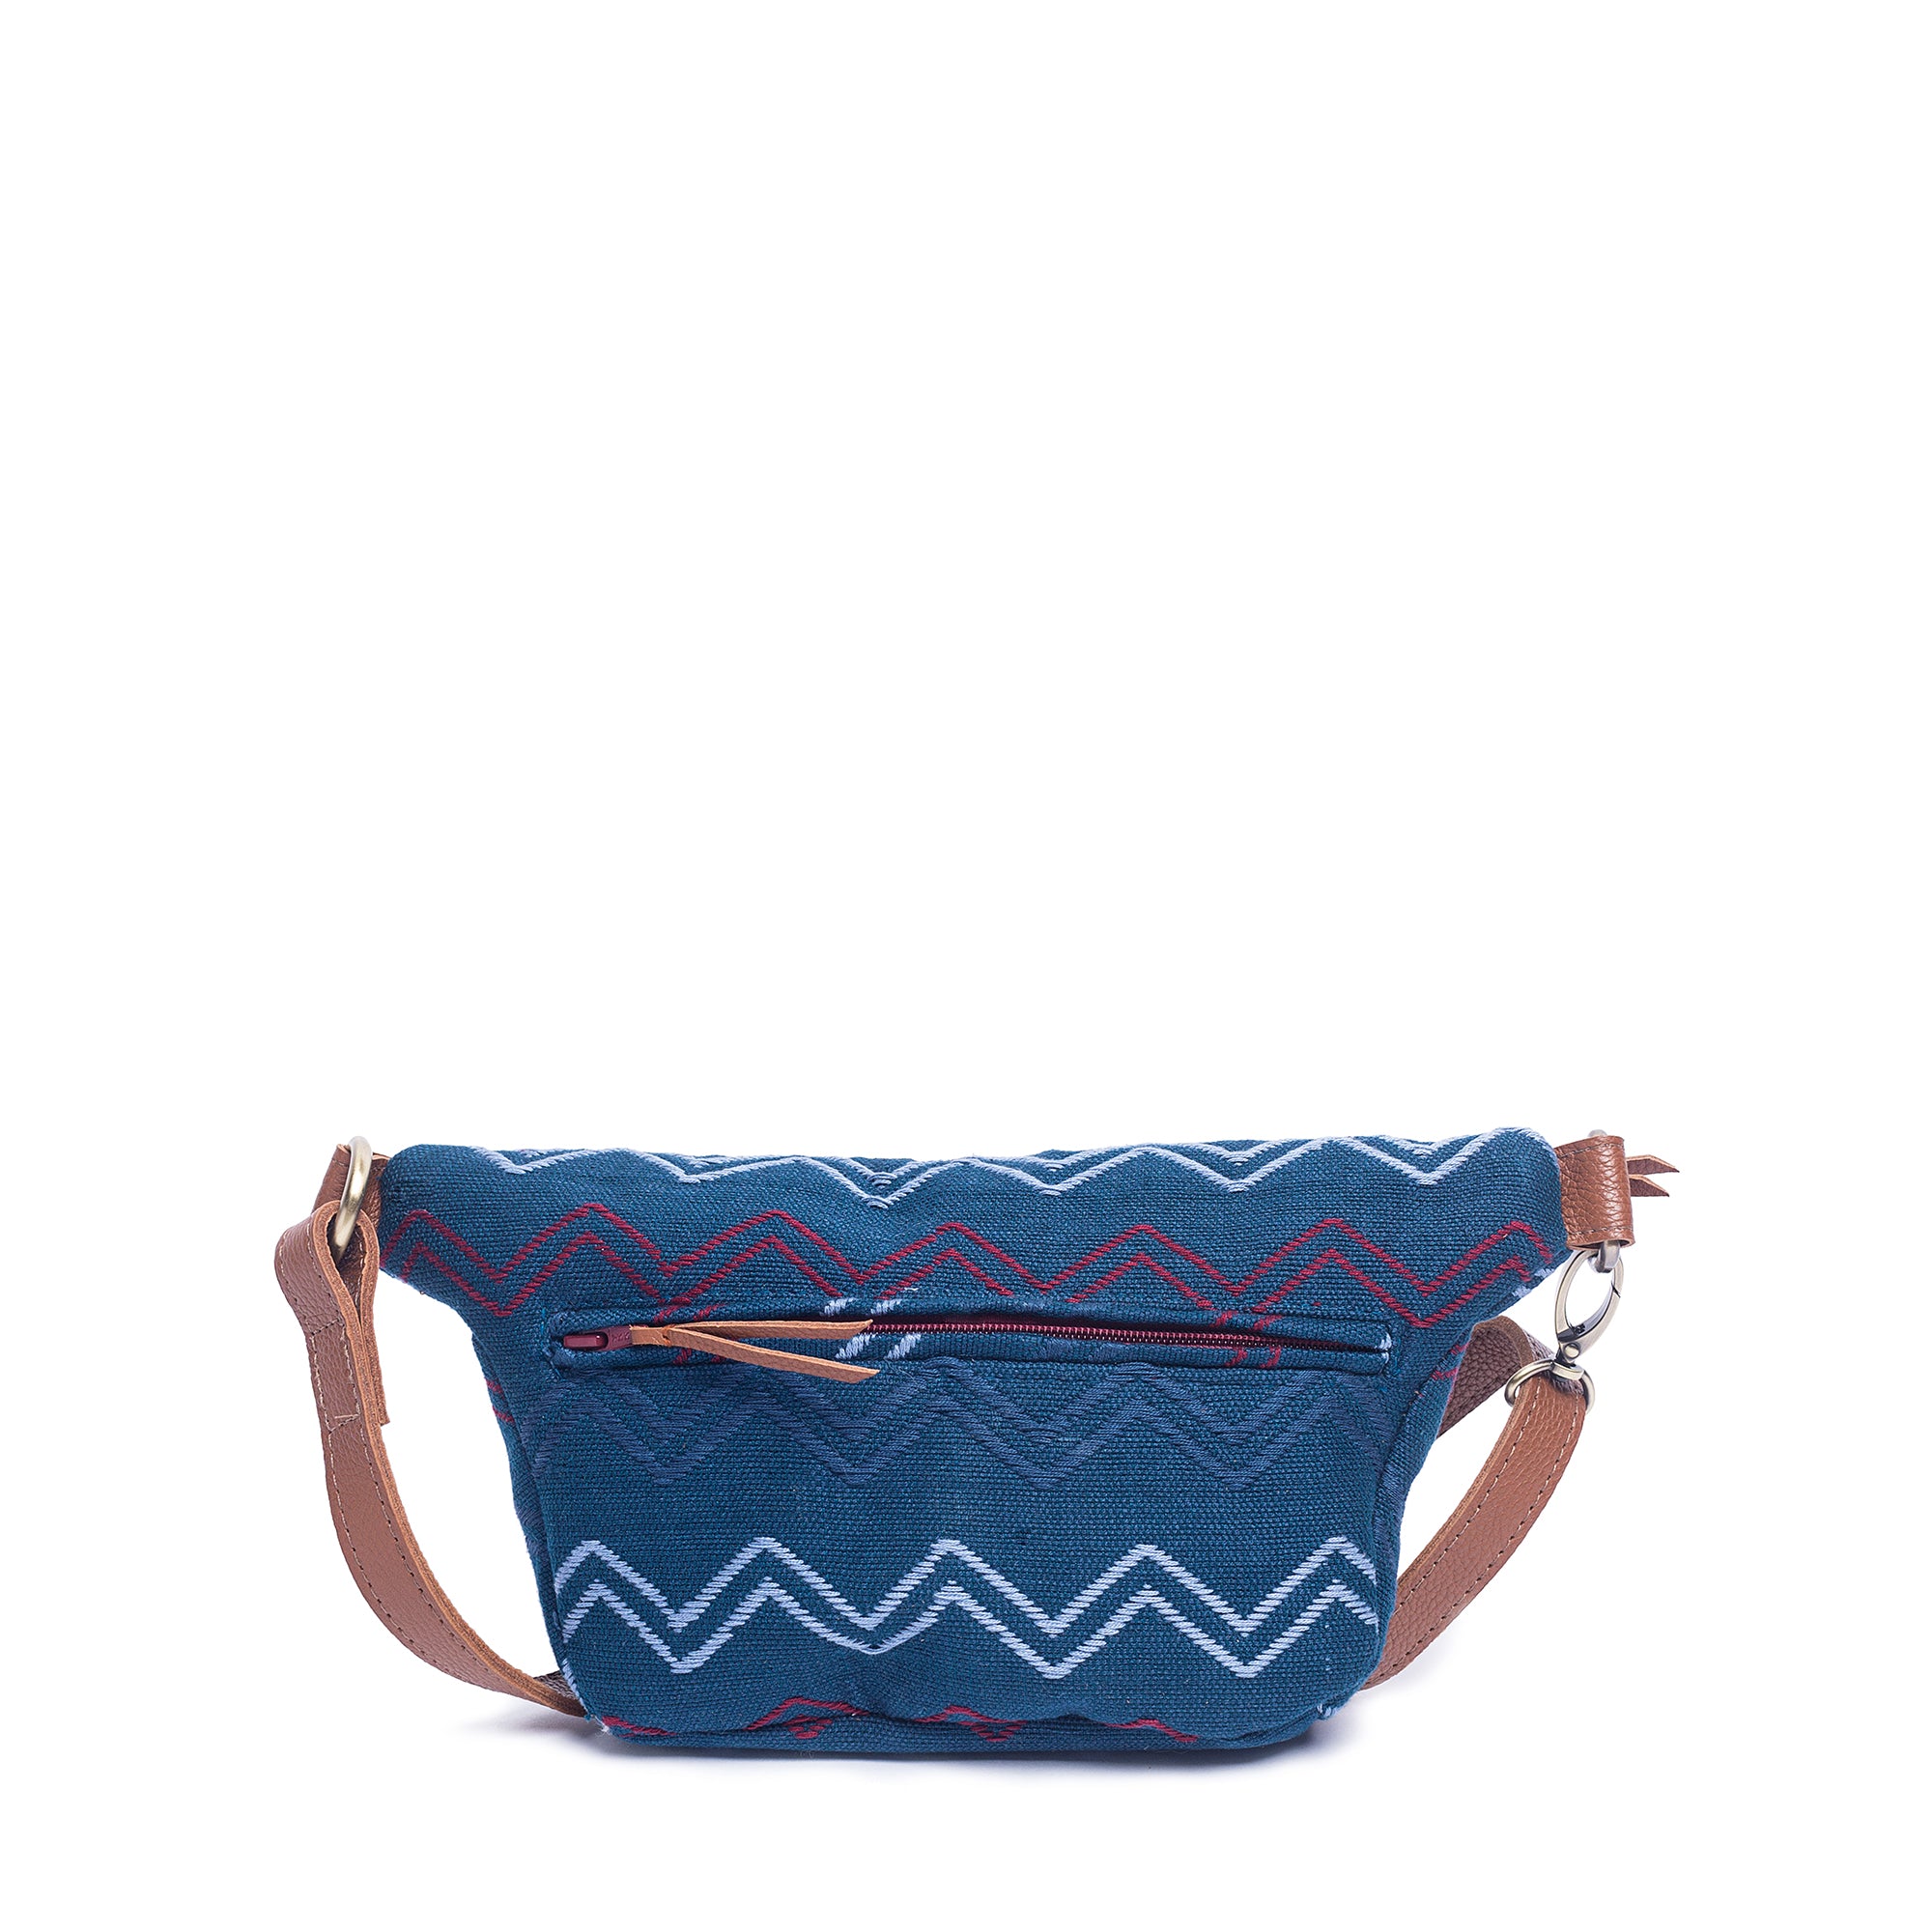 Back of the hand woven artisan Cruza Sling Belt Bag in Lake Ripple pattern. The fabric has a horizontal zigzag in light blue, dark blue, and red over a dark blue fabric. It has a leather adjustable strap, leather hem for the zipper, and leather zipper pull. The back also has a zippered pocket.